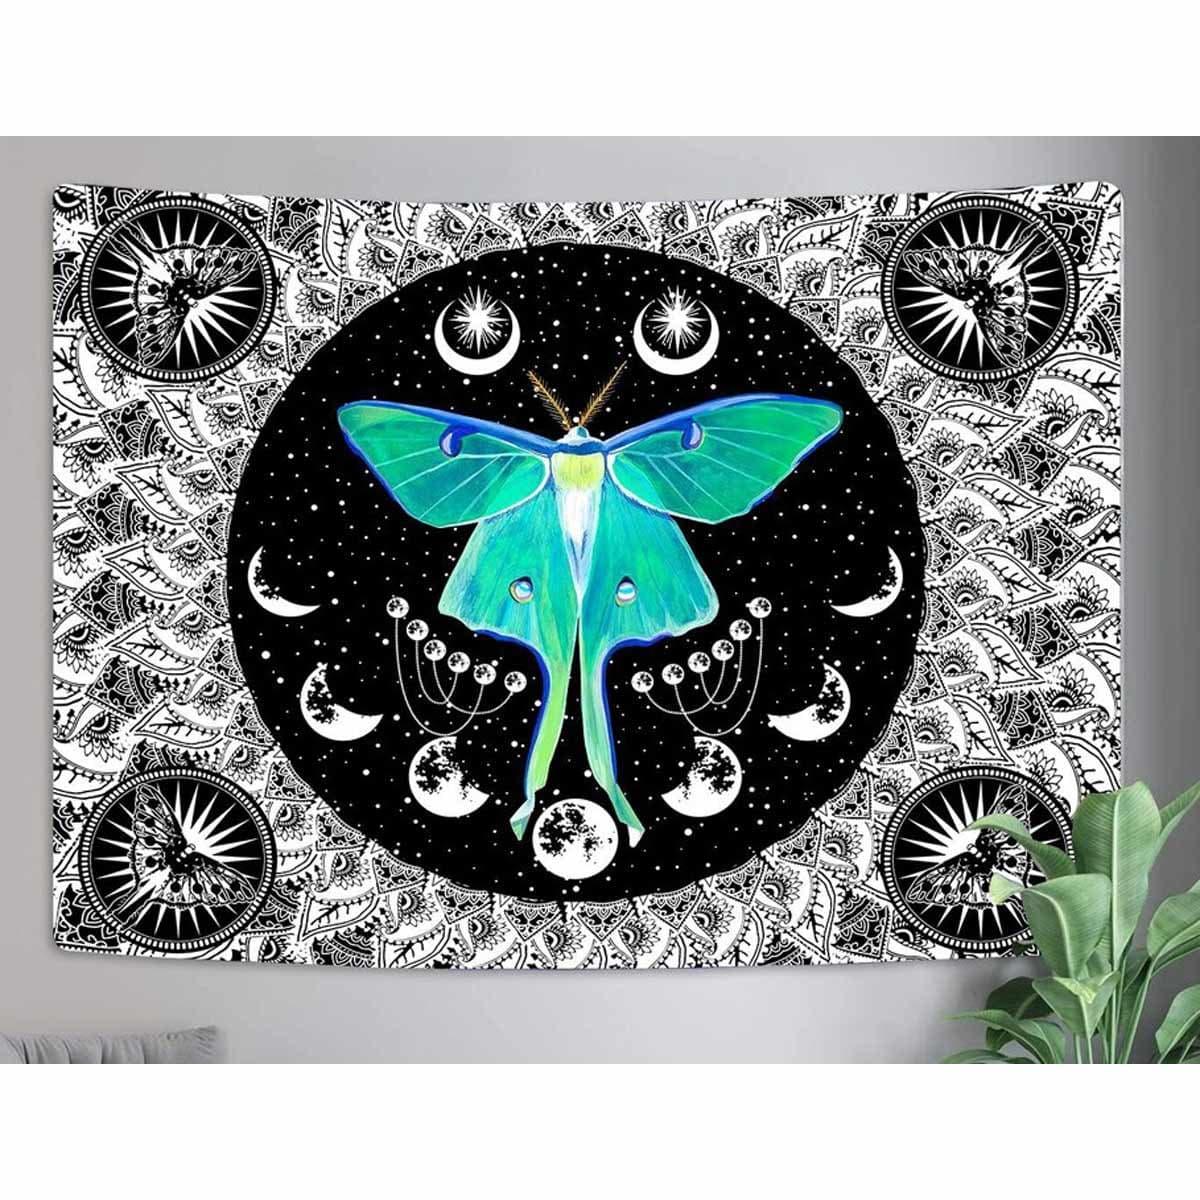 A wall tapestry with a large green luna moth surrounded by a starry sky, moon phases and mandala print